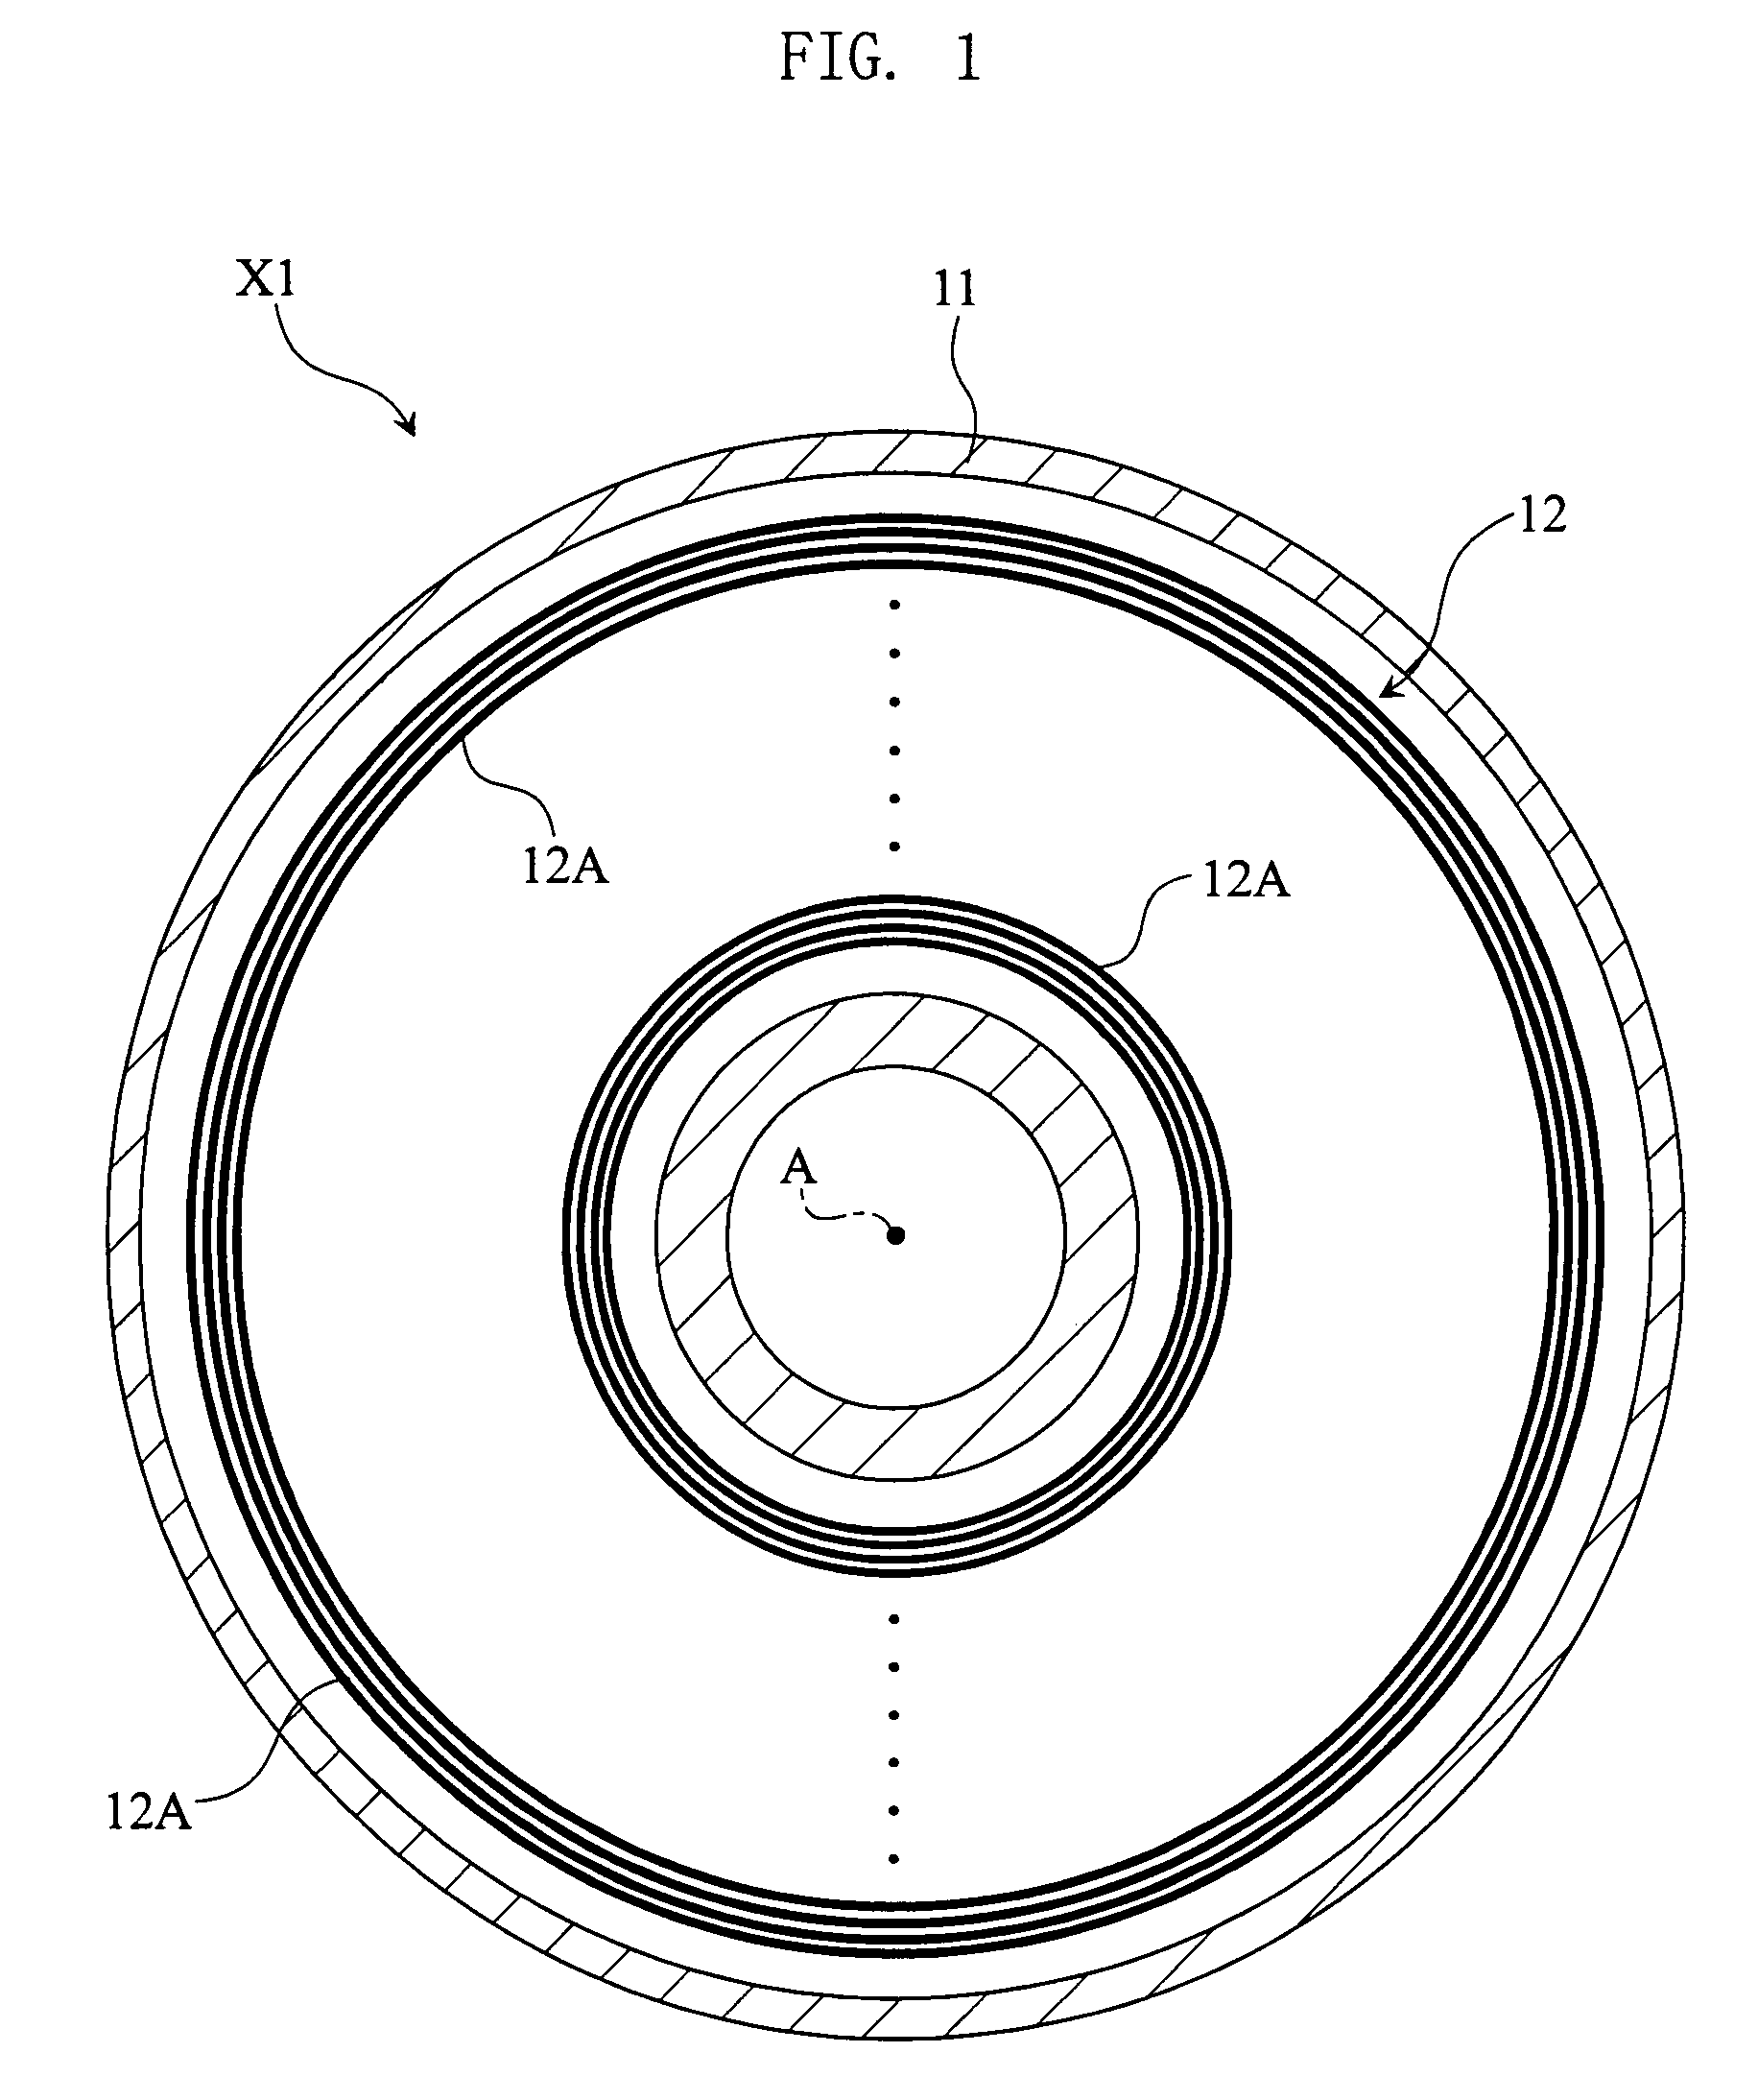 Magnetic recording medium and method of making the same